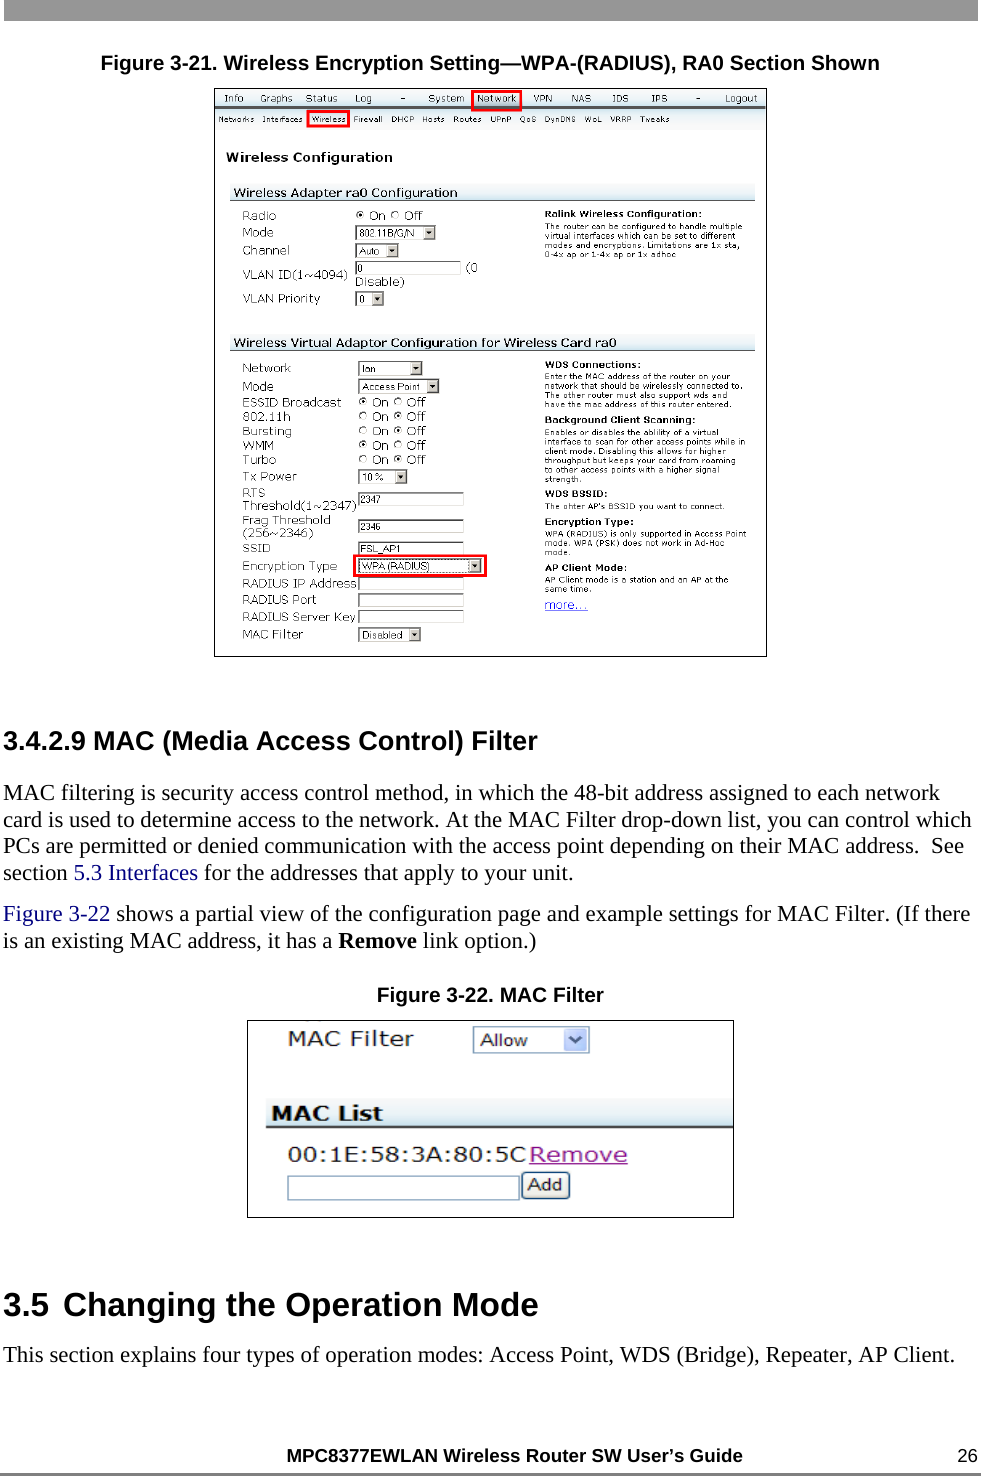                                                          MPC8377EWLAN Wireless Router SW User’s Guide    26 Figure 3-21. Wireless Encryption Setting—WPA-(RADIUS), RA0 Section Shown  3.4.2.9 MAC (Media Access Control) Filter MAC filtering is security access control method, in which the 48-bit address assigned to each network card is used to determine access to the network. At the MAC Filter drop-down list, you can control which PCs are permitted or denied communication with the access point depending on their MAC address.  See section 5.3 Interfaces for the addresses that apply to your unit. Figure 3-22 shows a partial view of the configuration page and example settings for MAC Filter. (If there is an existing MAC address, it has a Remove link option.) Figure 3-22. MAC Filter  3.5 Changing the Operation Mode This section explains four types of operation modes: Access Point, WDS (Bridge), Repeater, AP Client. 